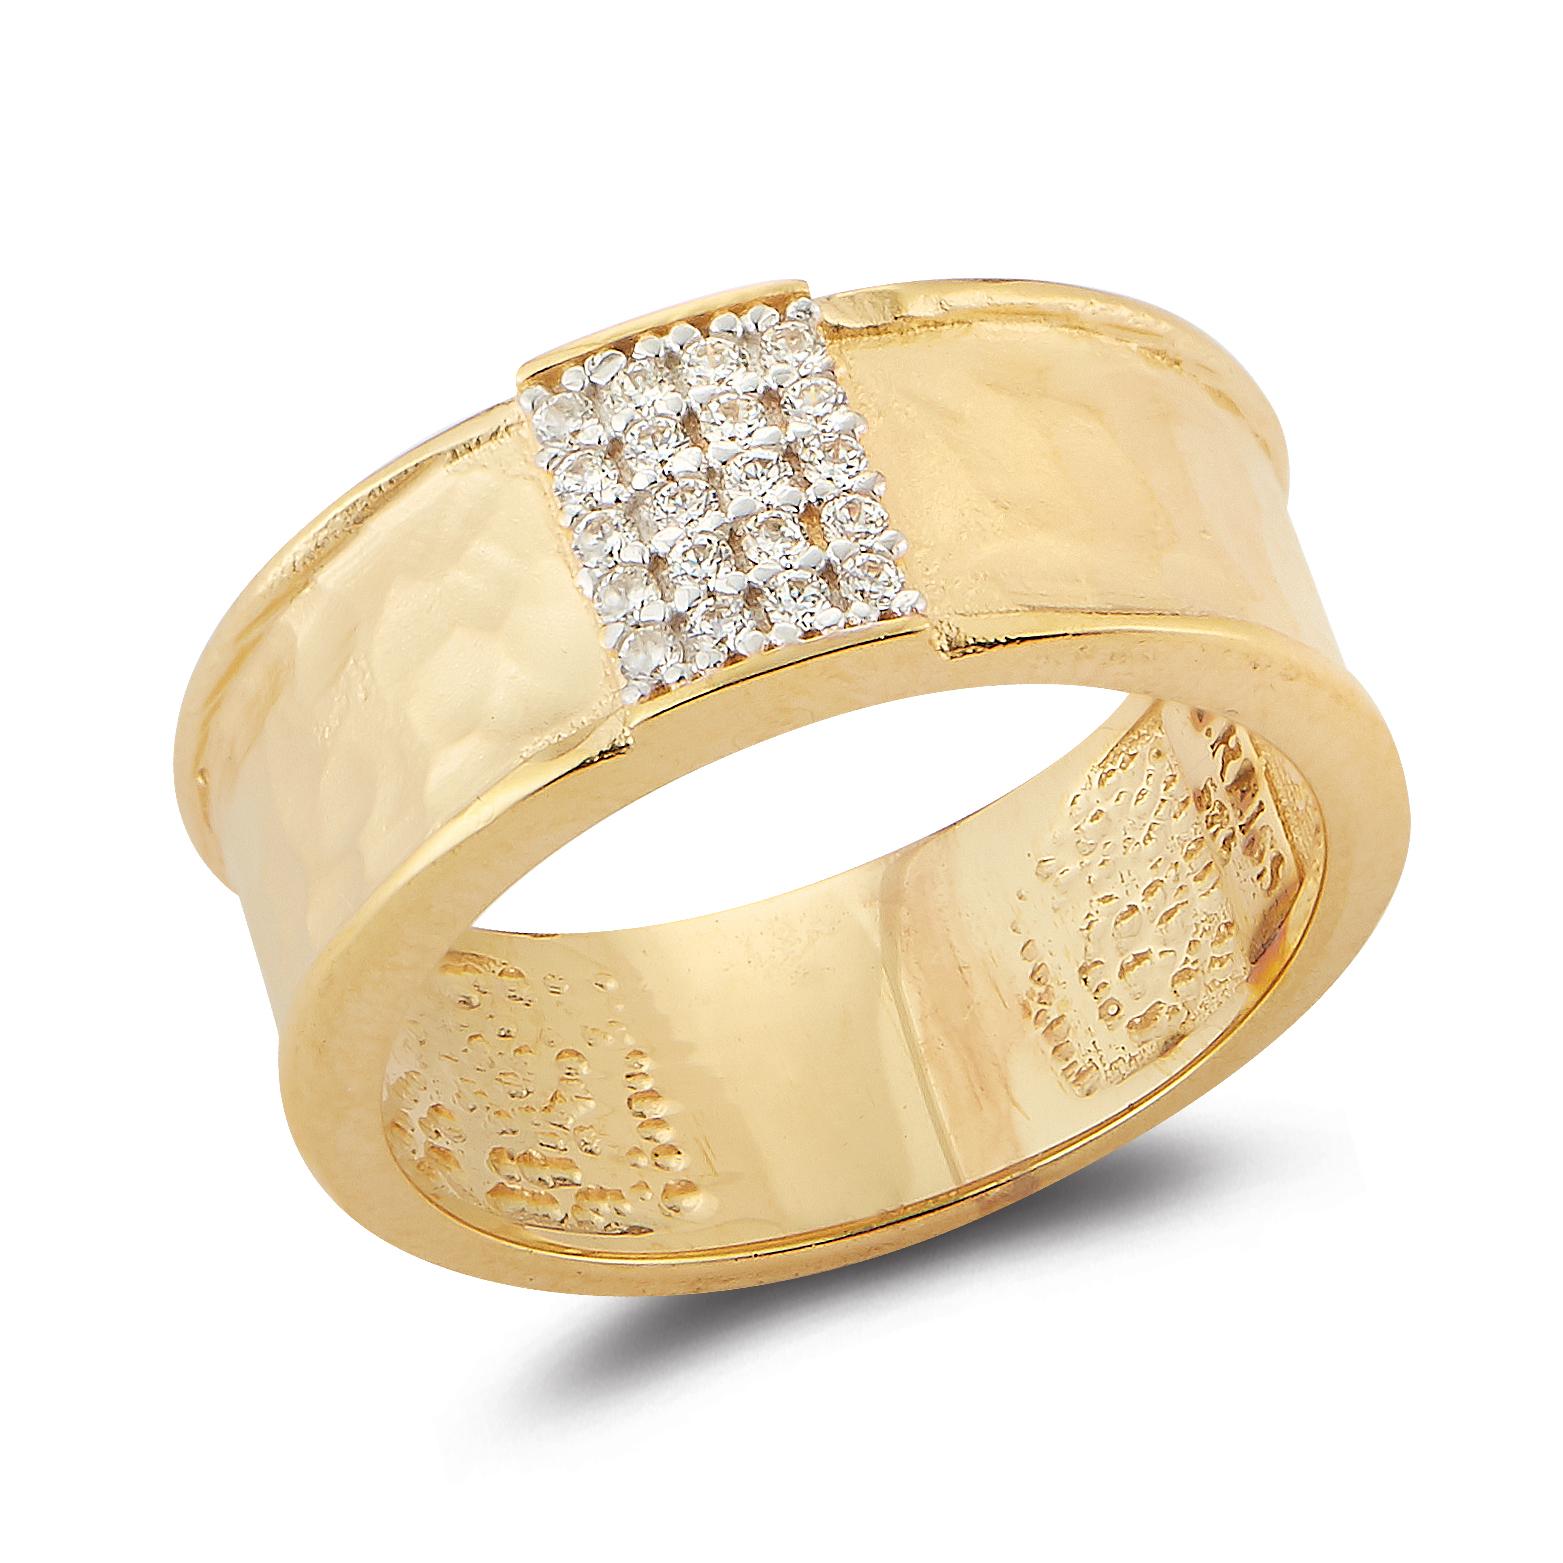 14 Karat Yellow Gold Hand-Crafted 8mm Matte and Hammer-Finished Ring, Centered with 0.12 Carats of a Pave Set Diamond Rectangle Motif.
